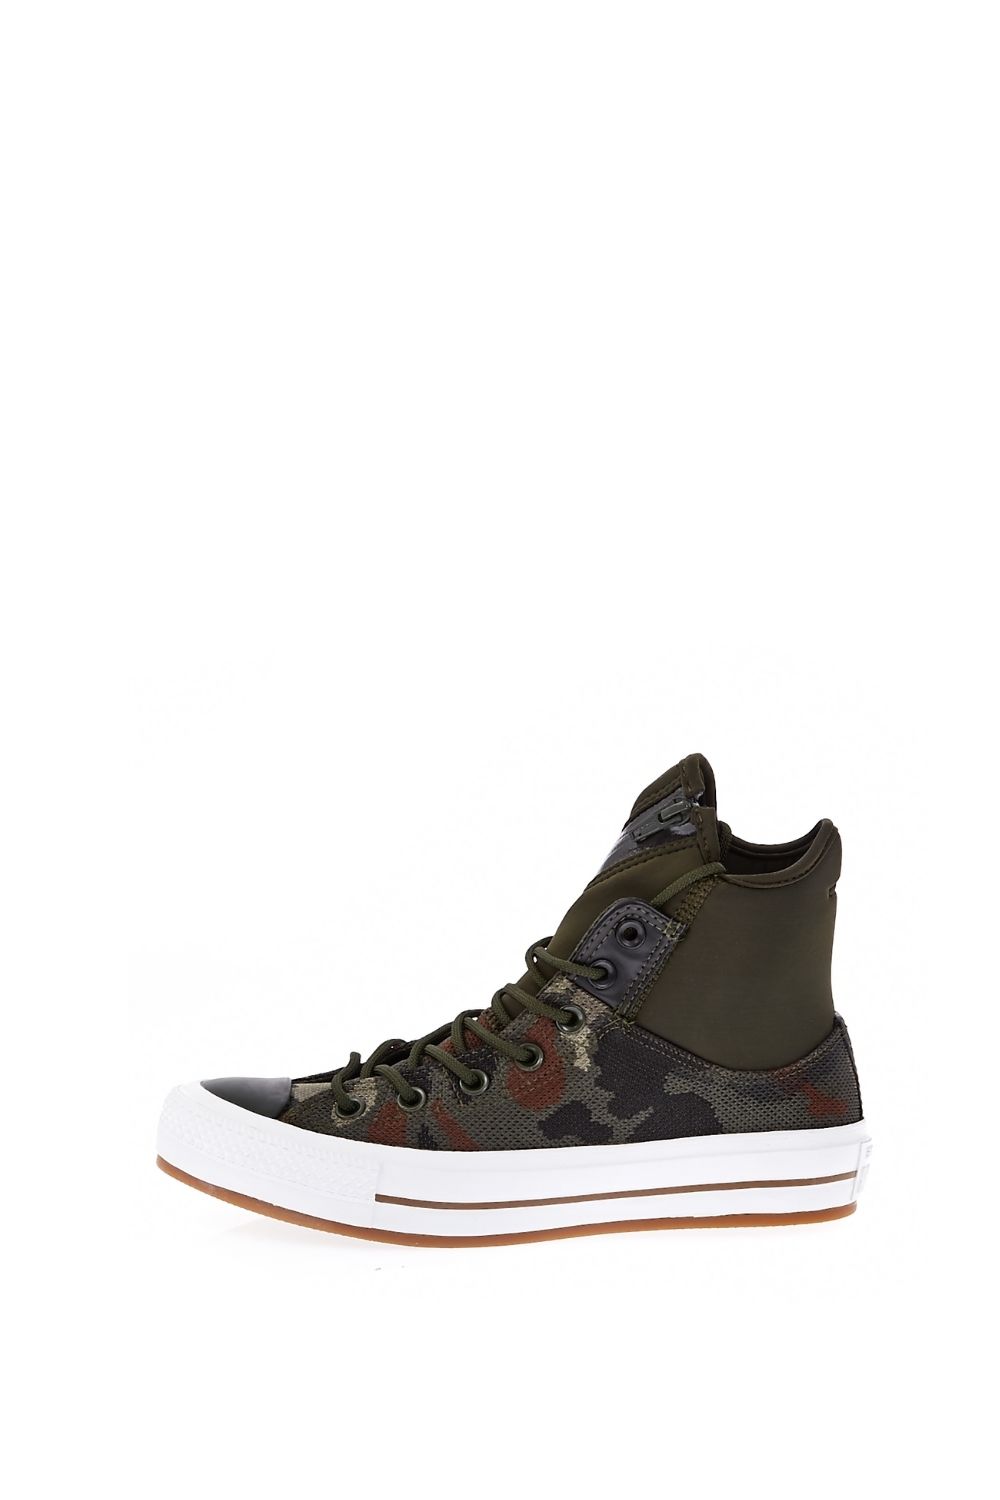 CONVERSE – Unisex ψηλά sneakers CONVERSE Chuck Taylor All Star MA-1 SE χακί